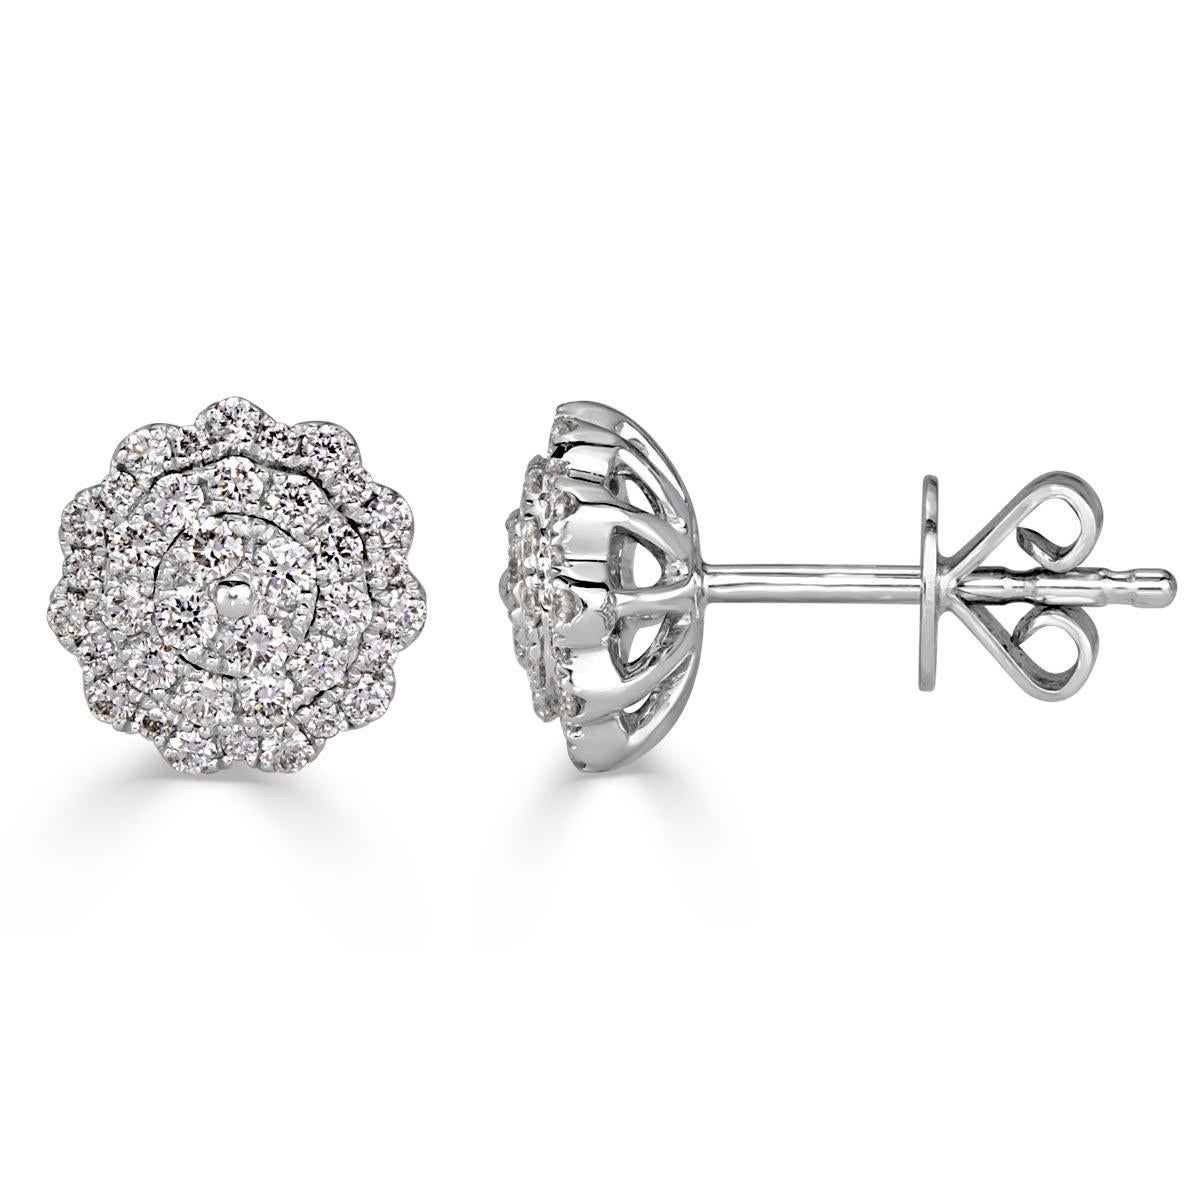 Handcrafted in 14k white gold, this feminine pair of diamond stud earrings features 0.47ct of round brilliant cut diamonds micro pavé set in a mesmerizing design. The diamonds are graded at E-F, VS1-VS2.